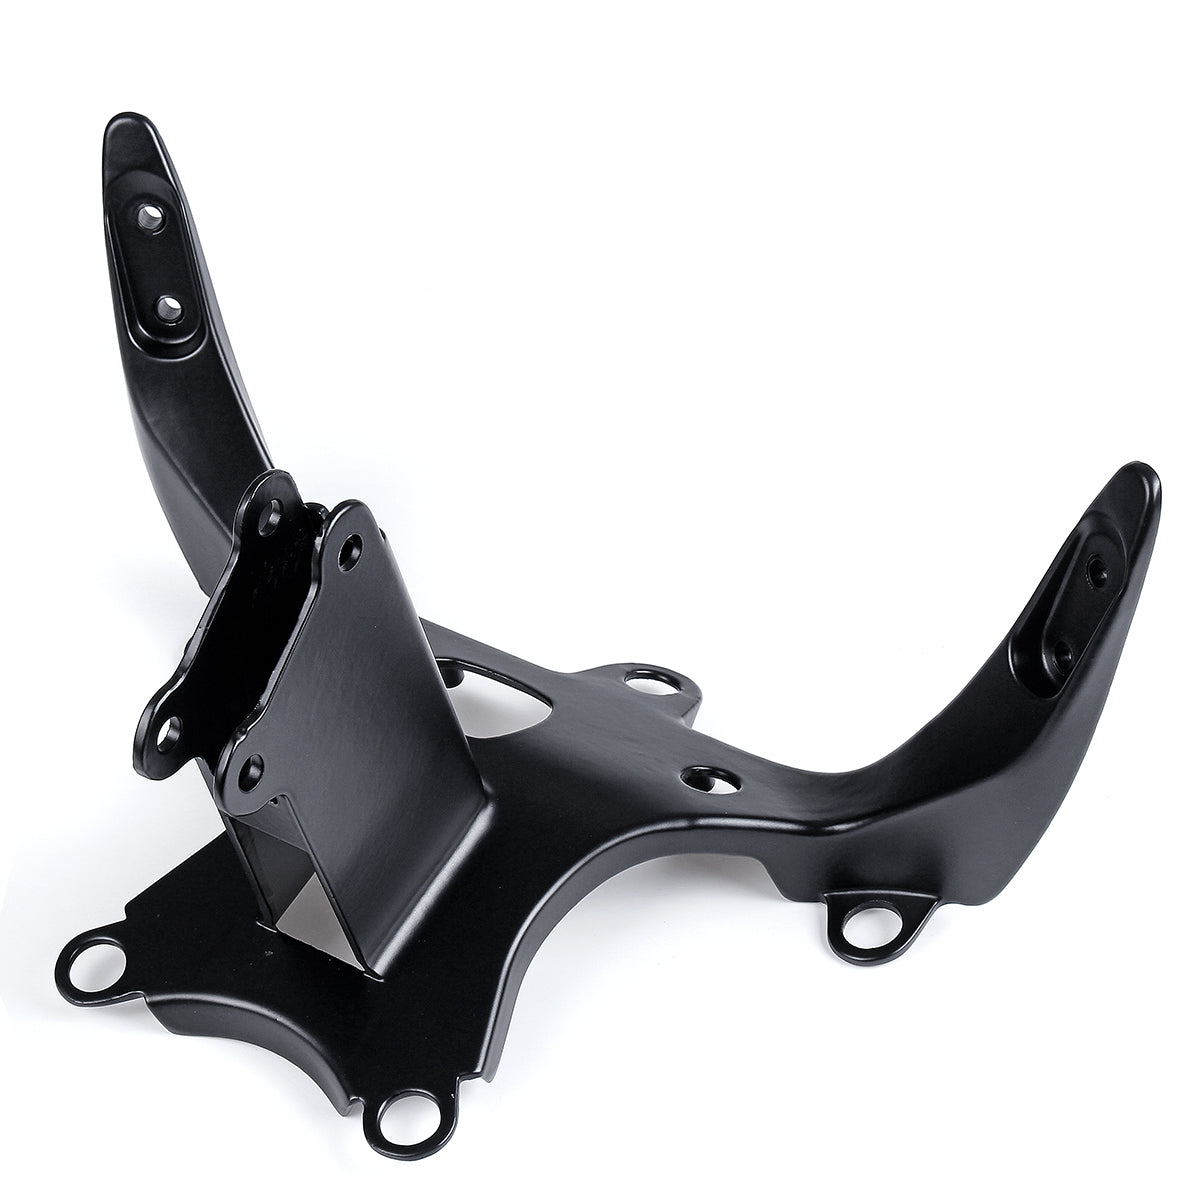 Dim Gray Motorcycle Front Head Upper Fairing Stay Bracket For Yamaha R1 YZF YZF-R1 1998-1999